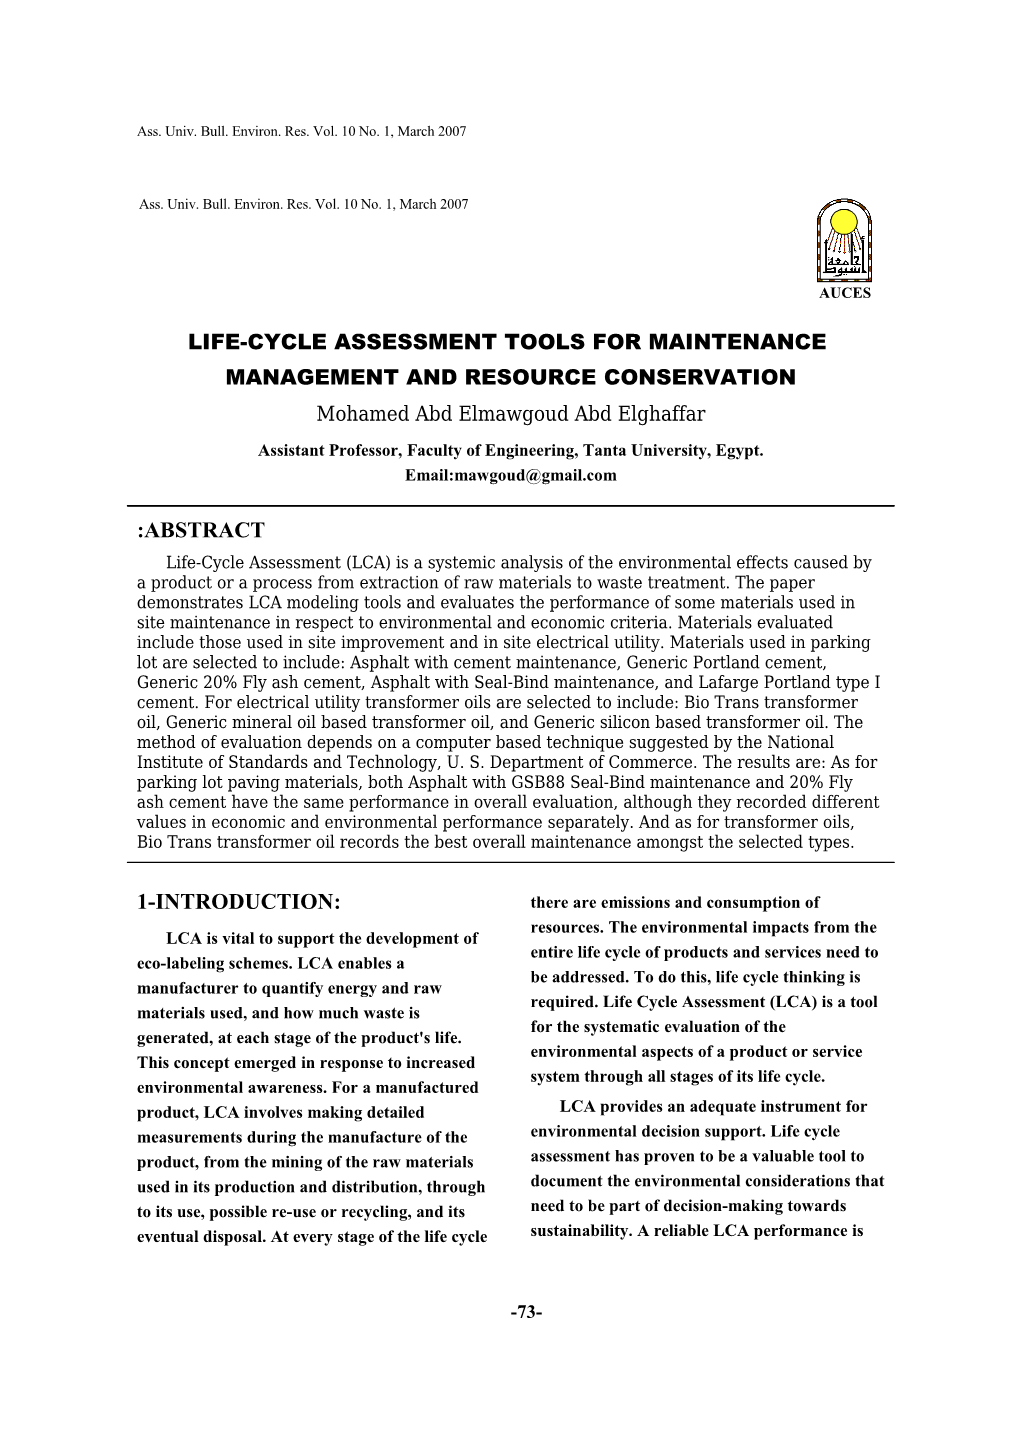 LCA for Materials Management and Resource Conservation